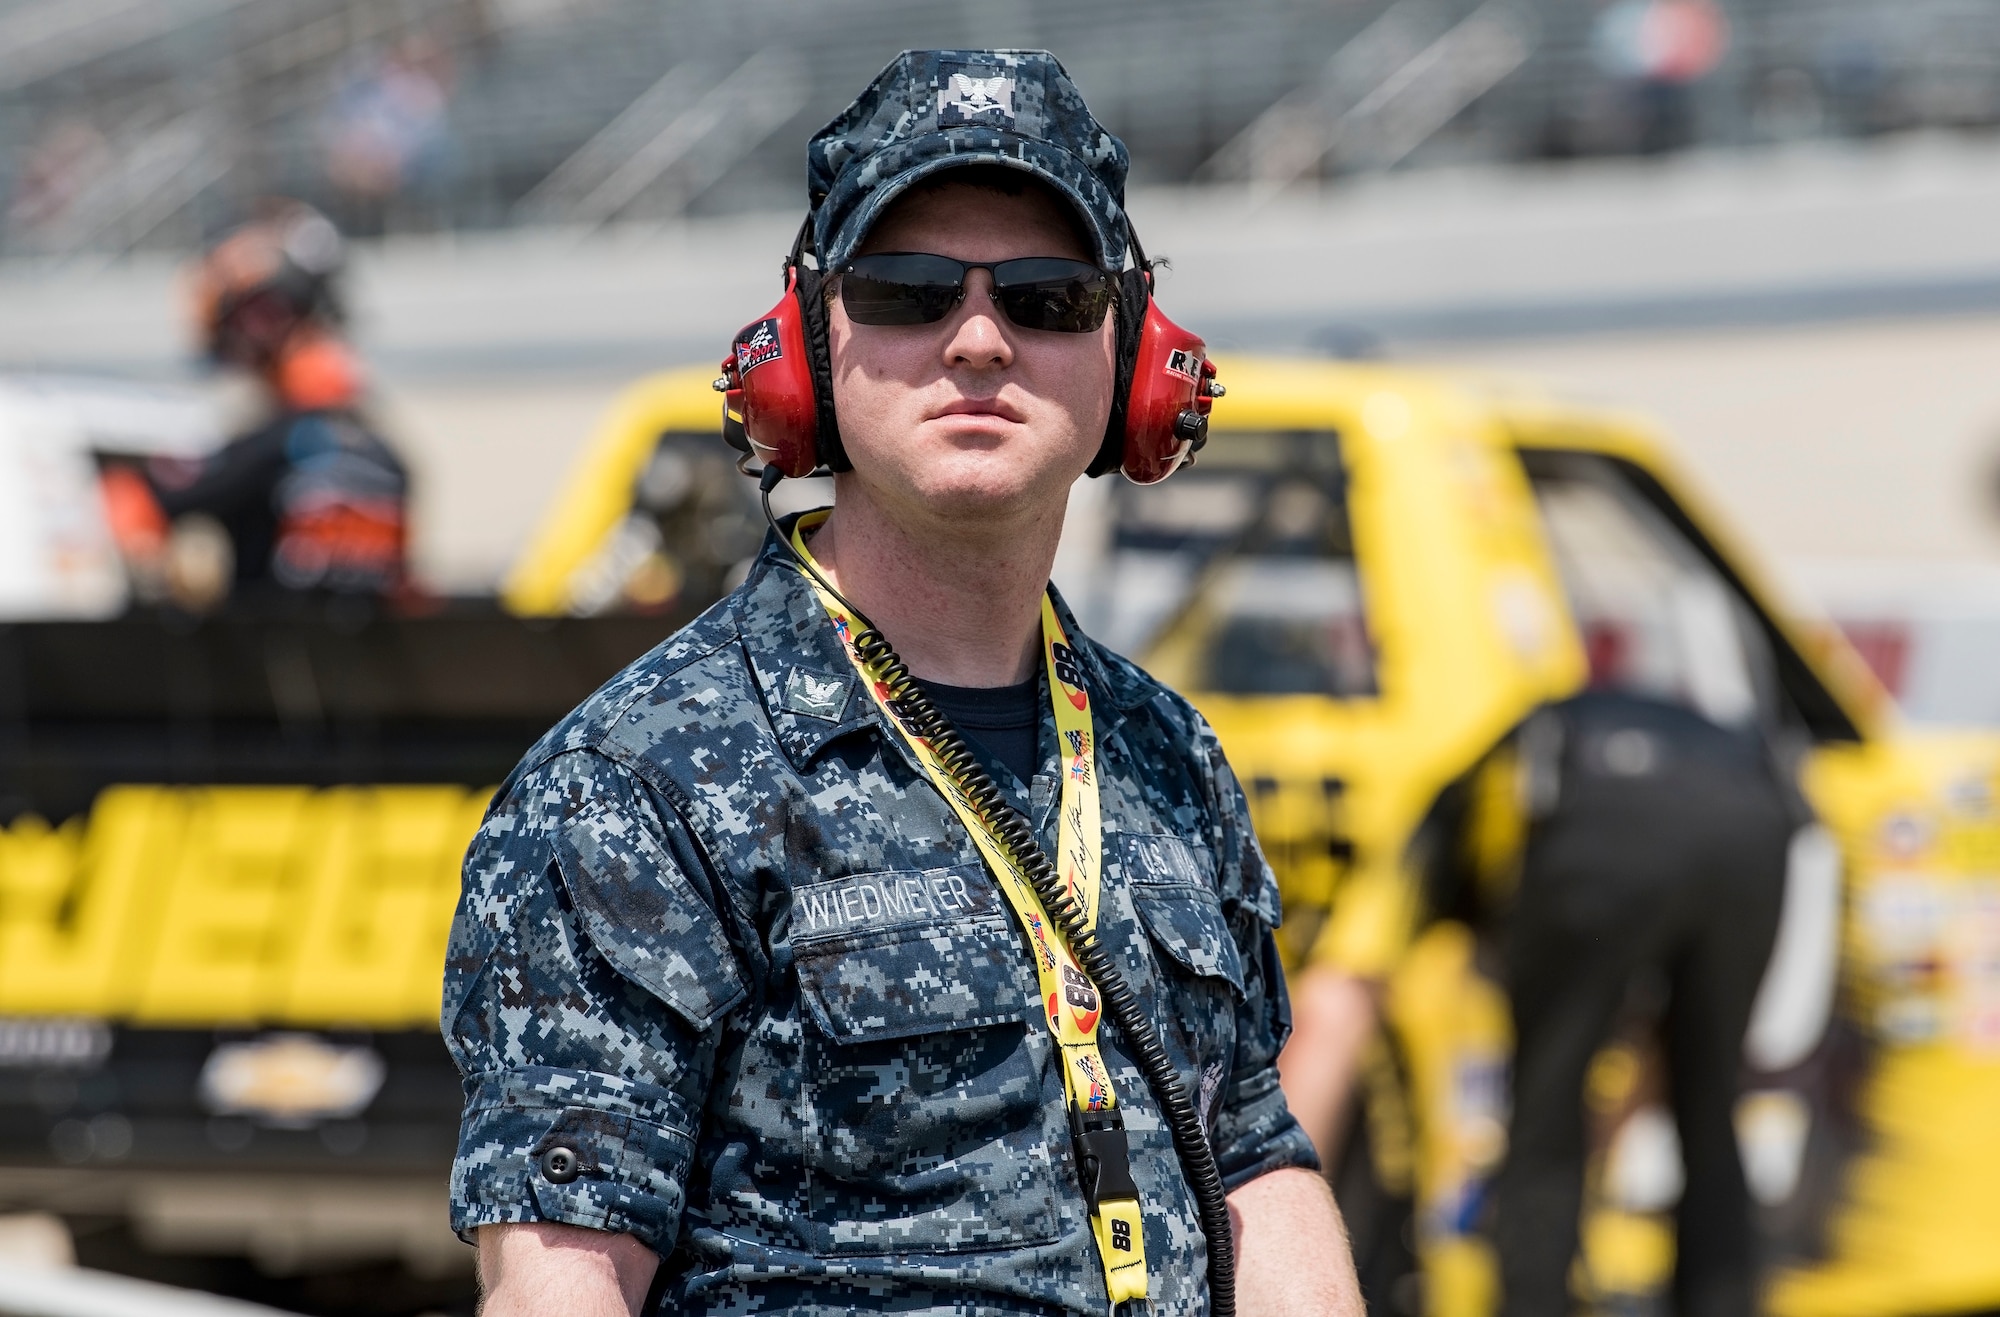 Hospital Corpsman 3rd Class Tyler Wiedmeyer, Armed Forces Medical Examiner System histopathology technician, watches NASCAR Camping World Truck Series trucks prepare for a qualifying session May 4, 2018, at Dover International Speedway, Dover, Del. Wiedmeyer and other honorary pit crew members had access to pit road and spoke with drivers and crew members prior to qualifying for the 19th Annual “JEGS 200” race later that afternoon. (U.S. Air Force photo by Roland Balik)